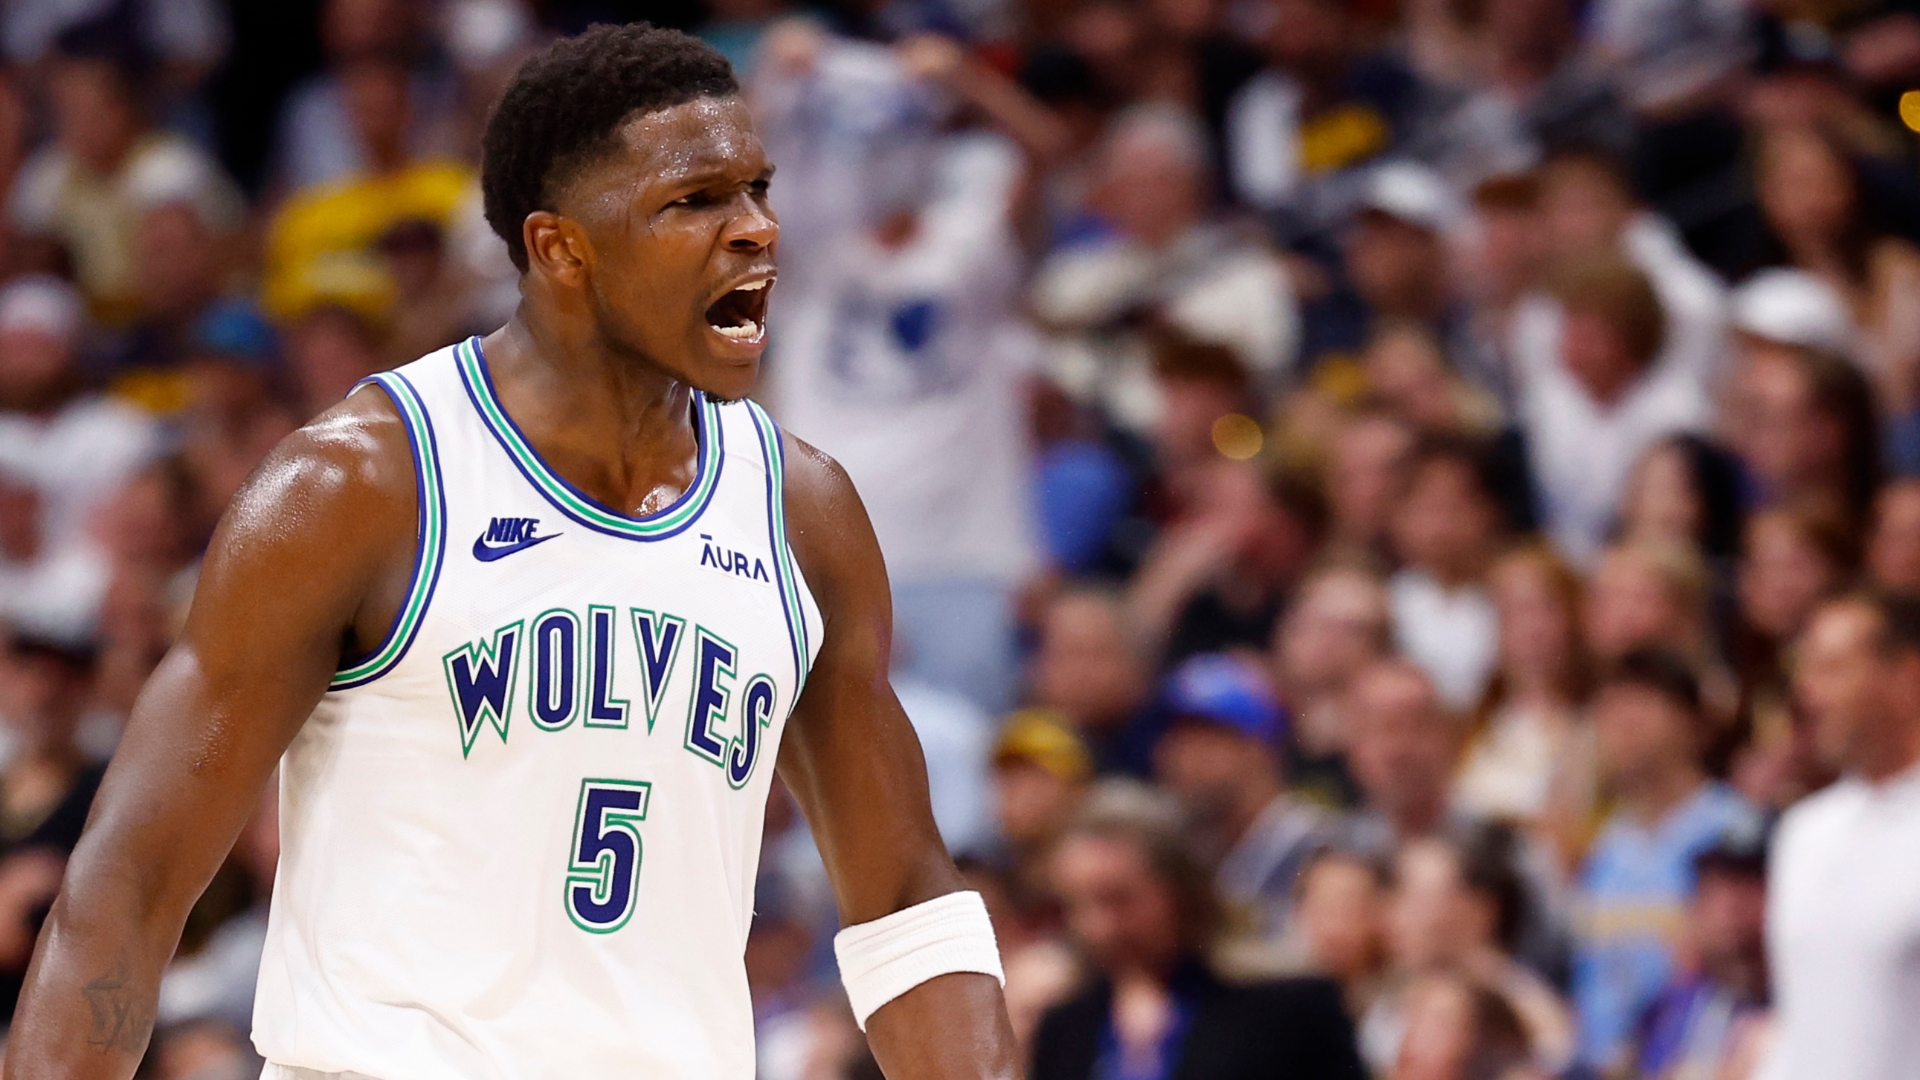 Wolves overcome 20-point deficit to eliminate defending champ Nuggets in Game 7